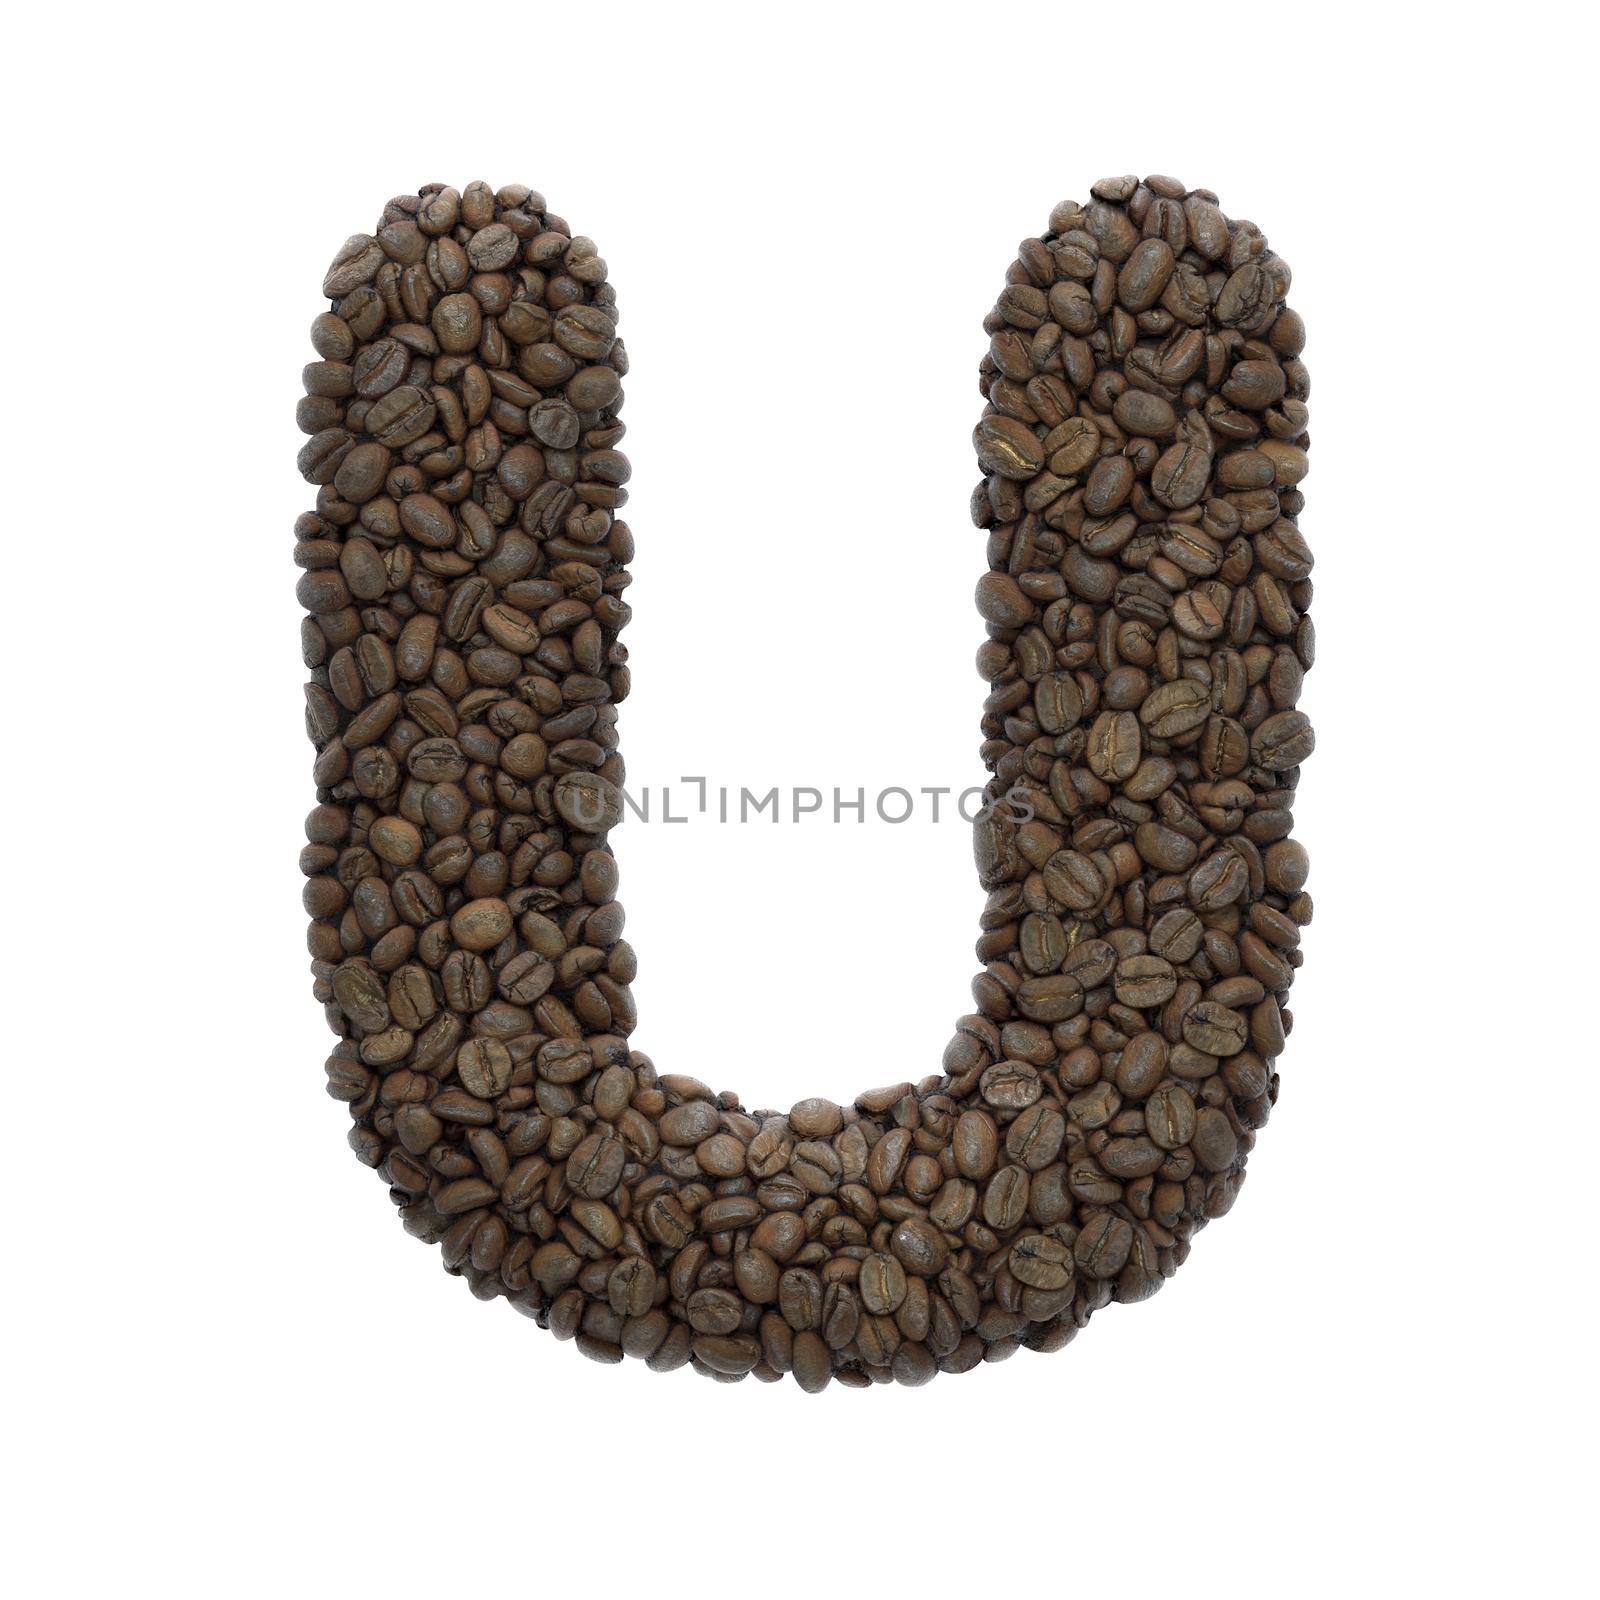 Coffee letter U - Capital 3d roasted beans font - suitable for Coffee, energy or insomnia related subjects by chrisroll